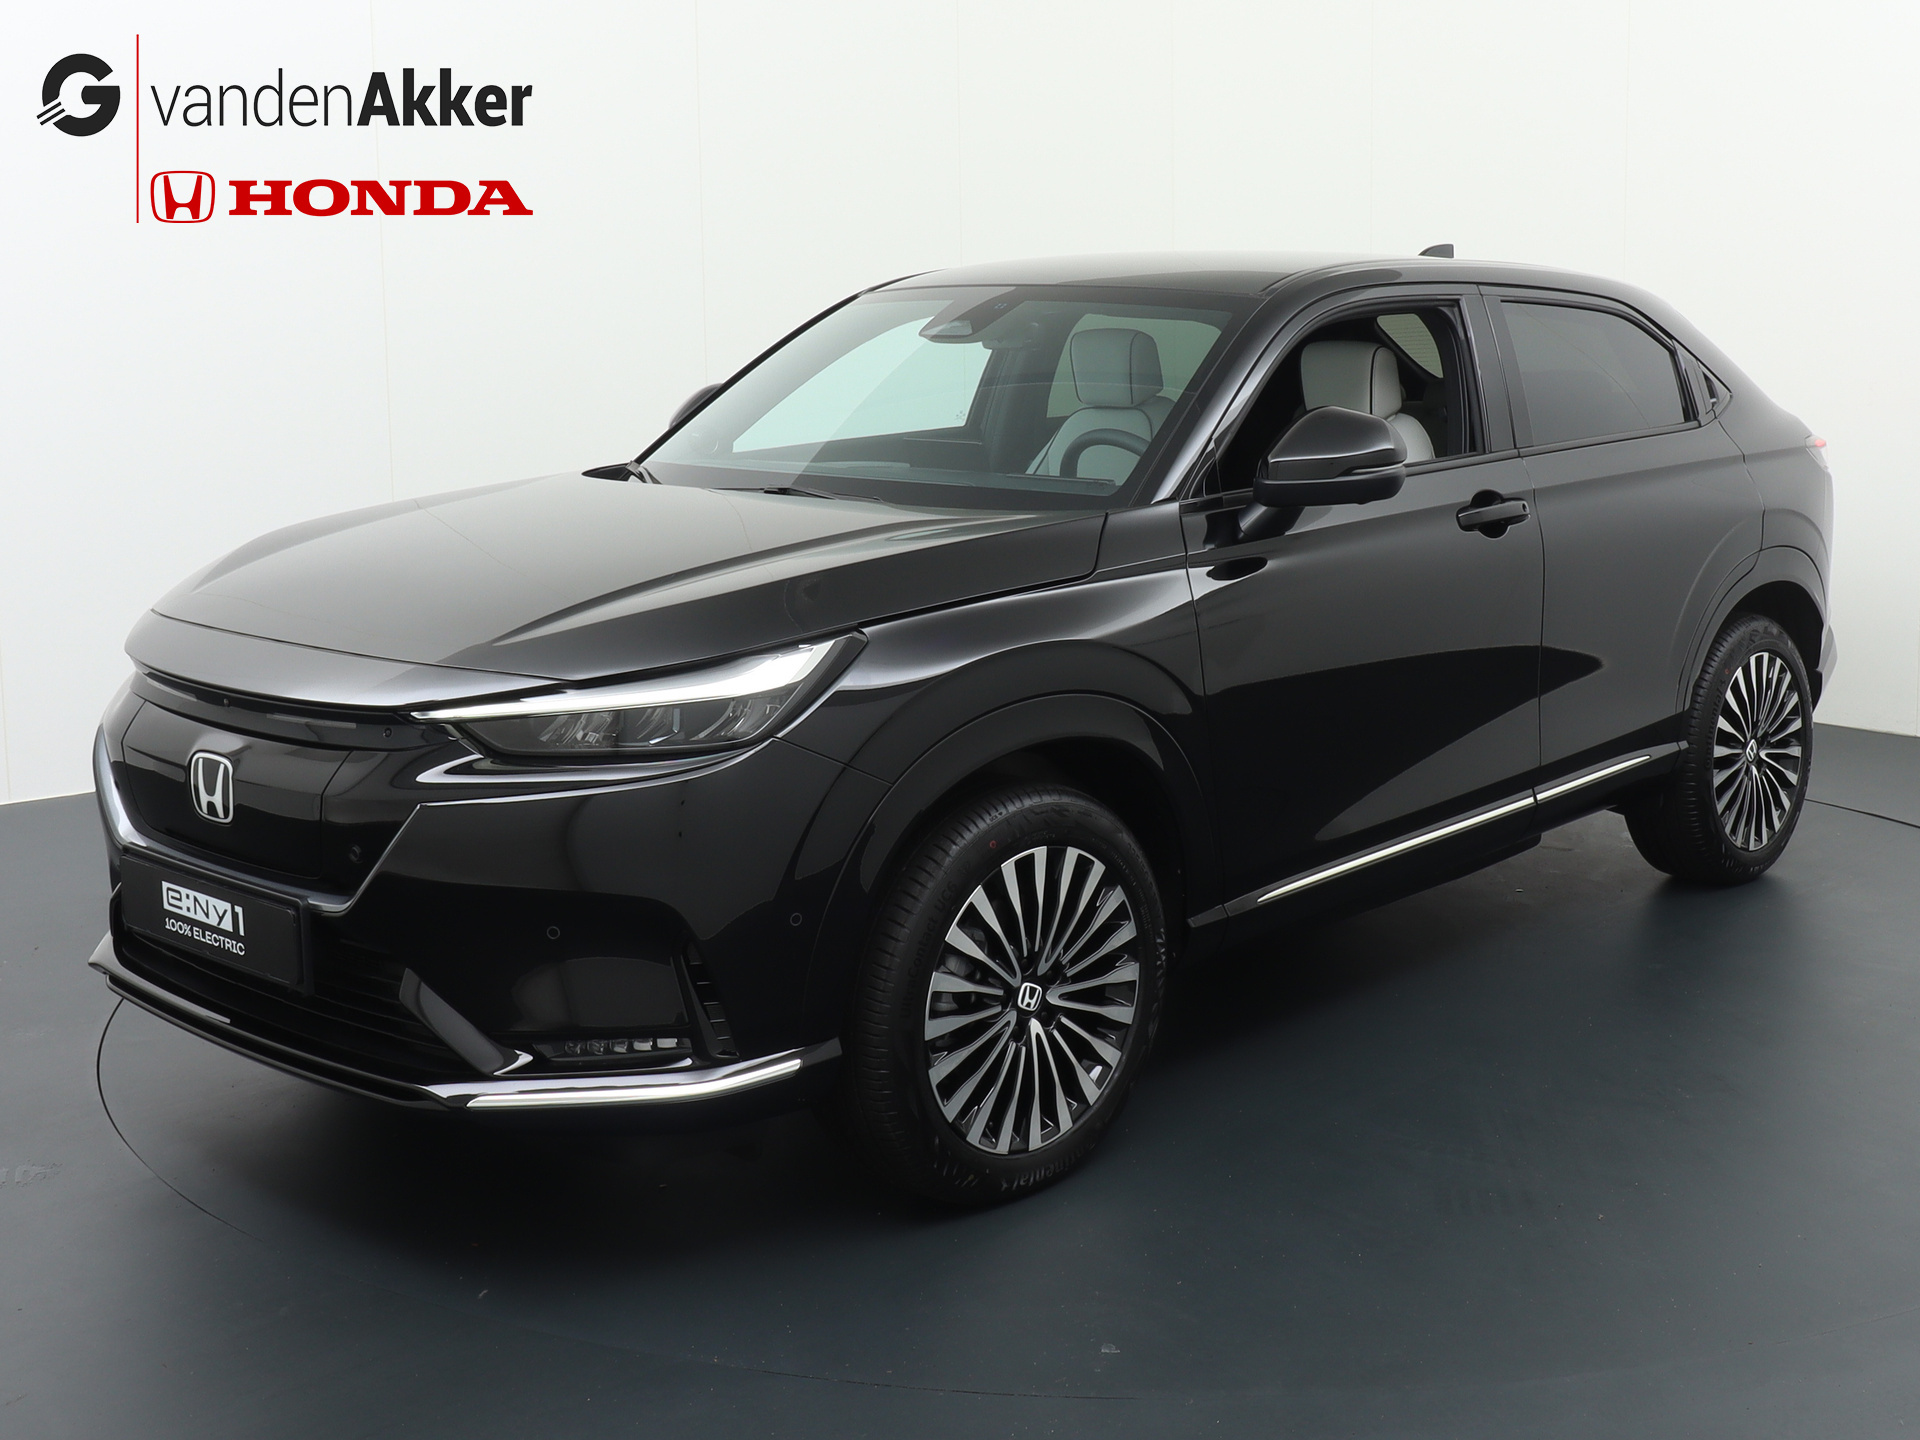 HONDA E:ny1 68,8 kWh 204pk Aut Limited Edition Full Electric Actieprijs € 495,- Private Lease